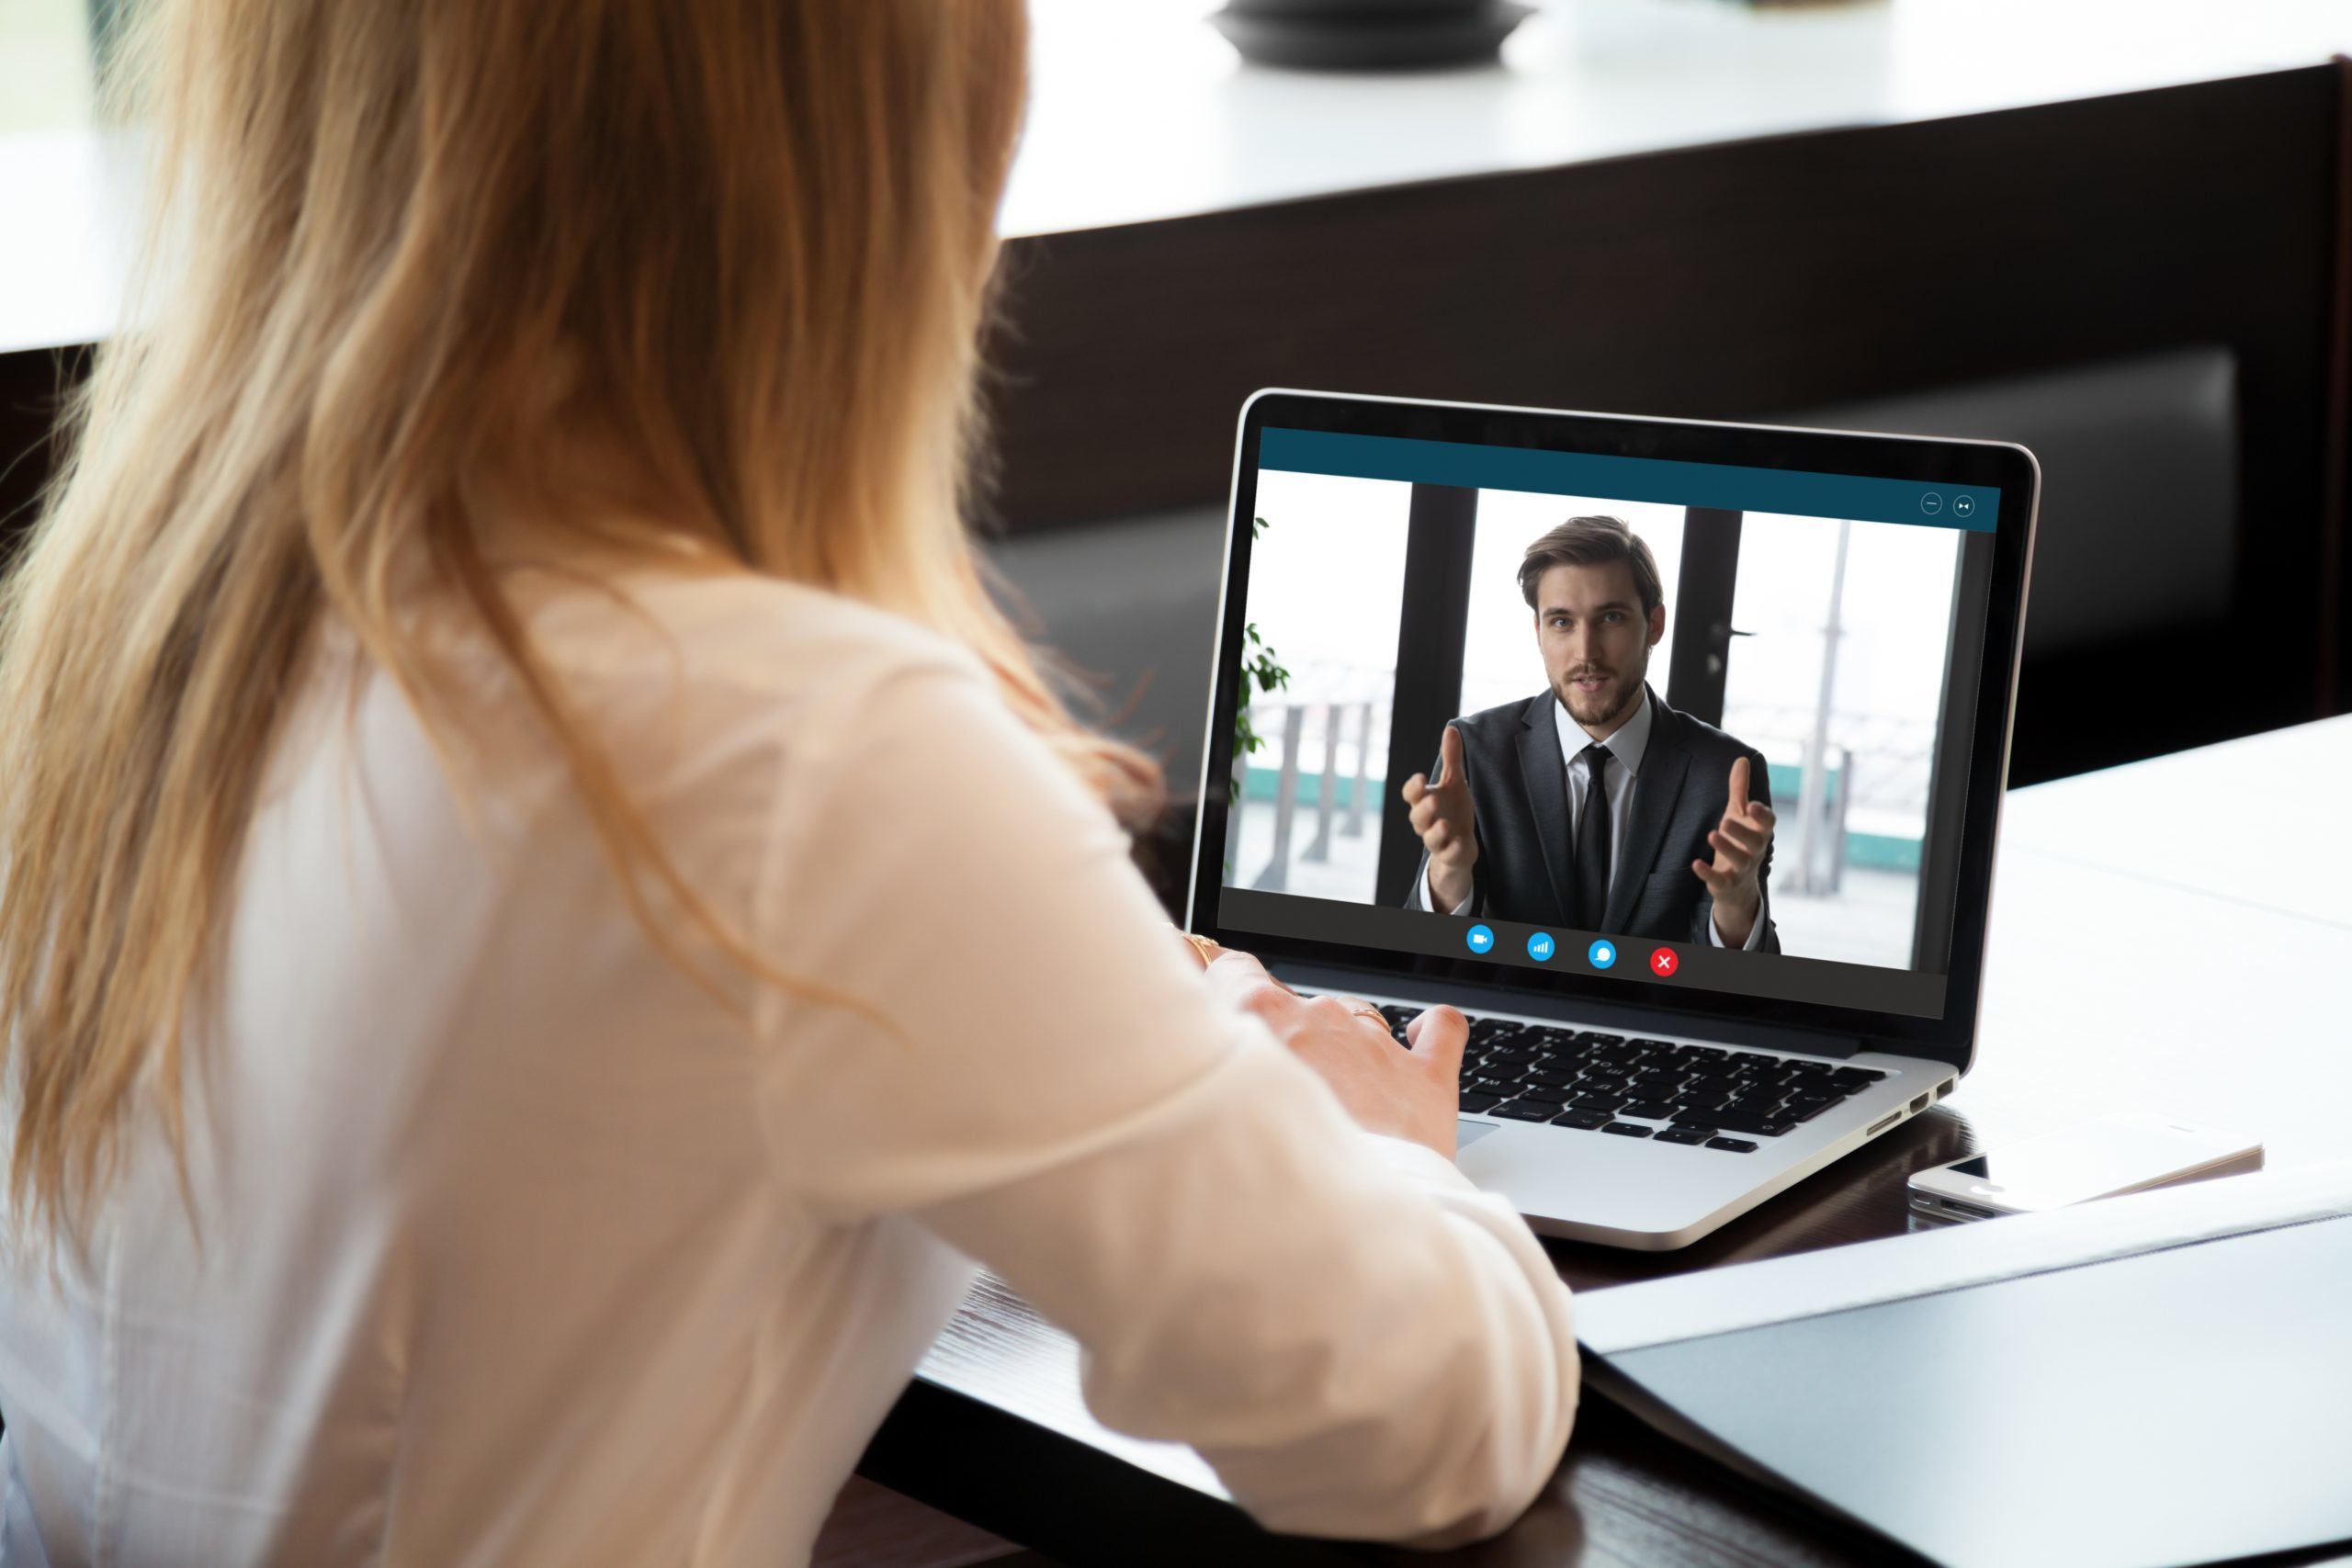 Female employee interviewing on video call with the hiring manager.